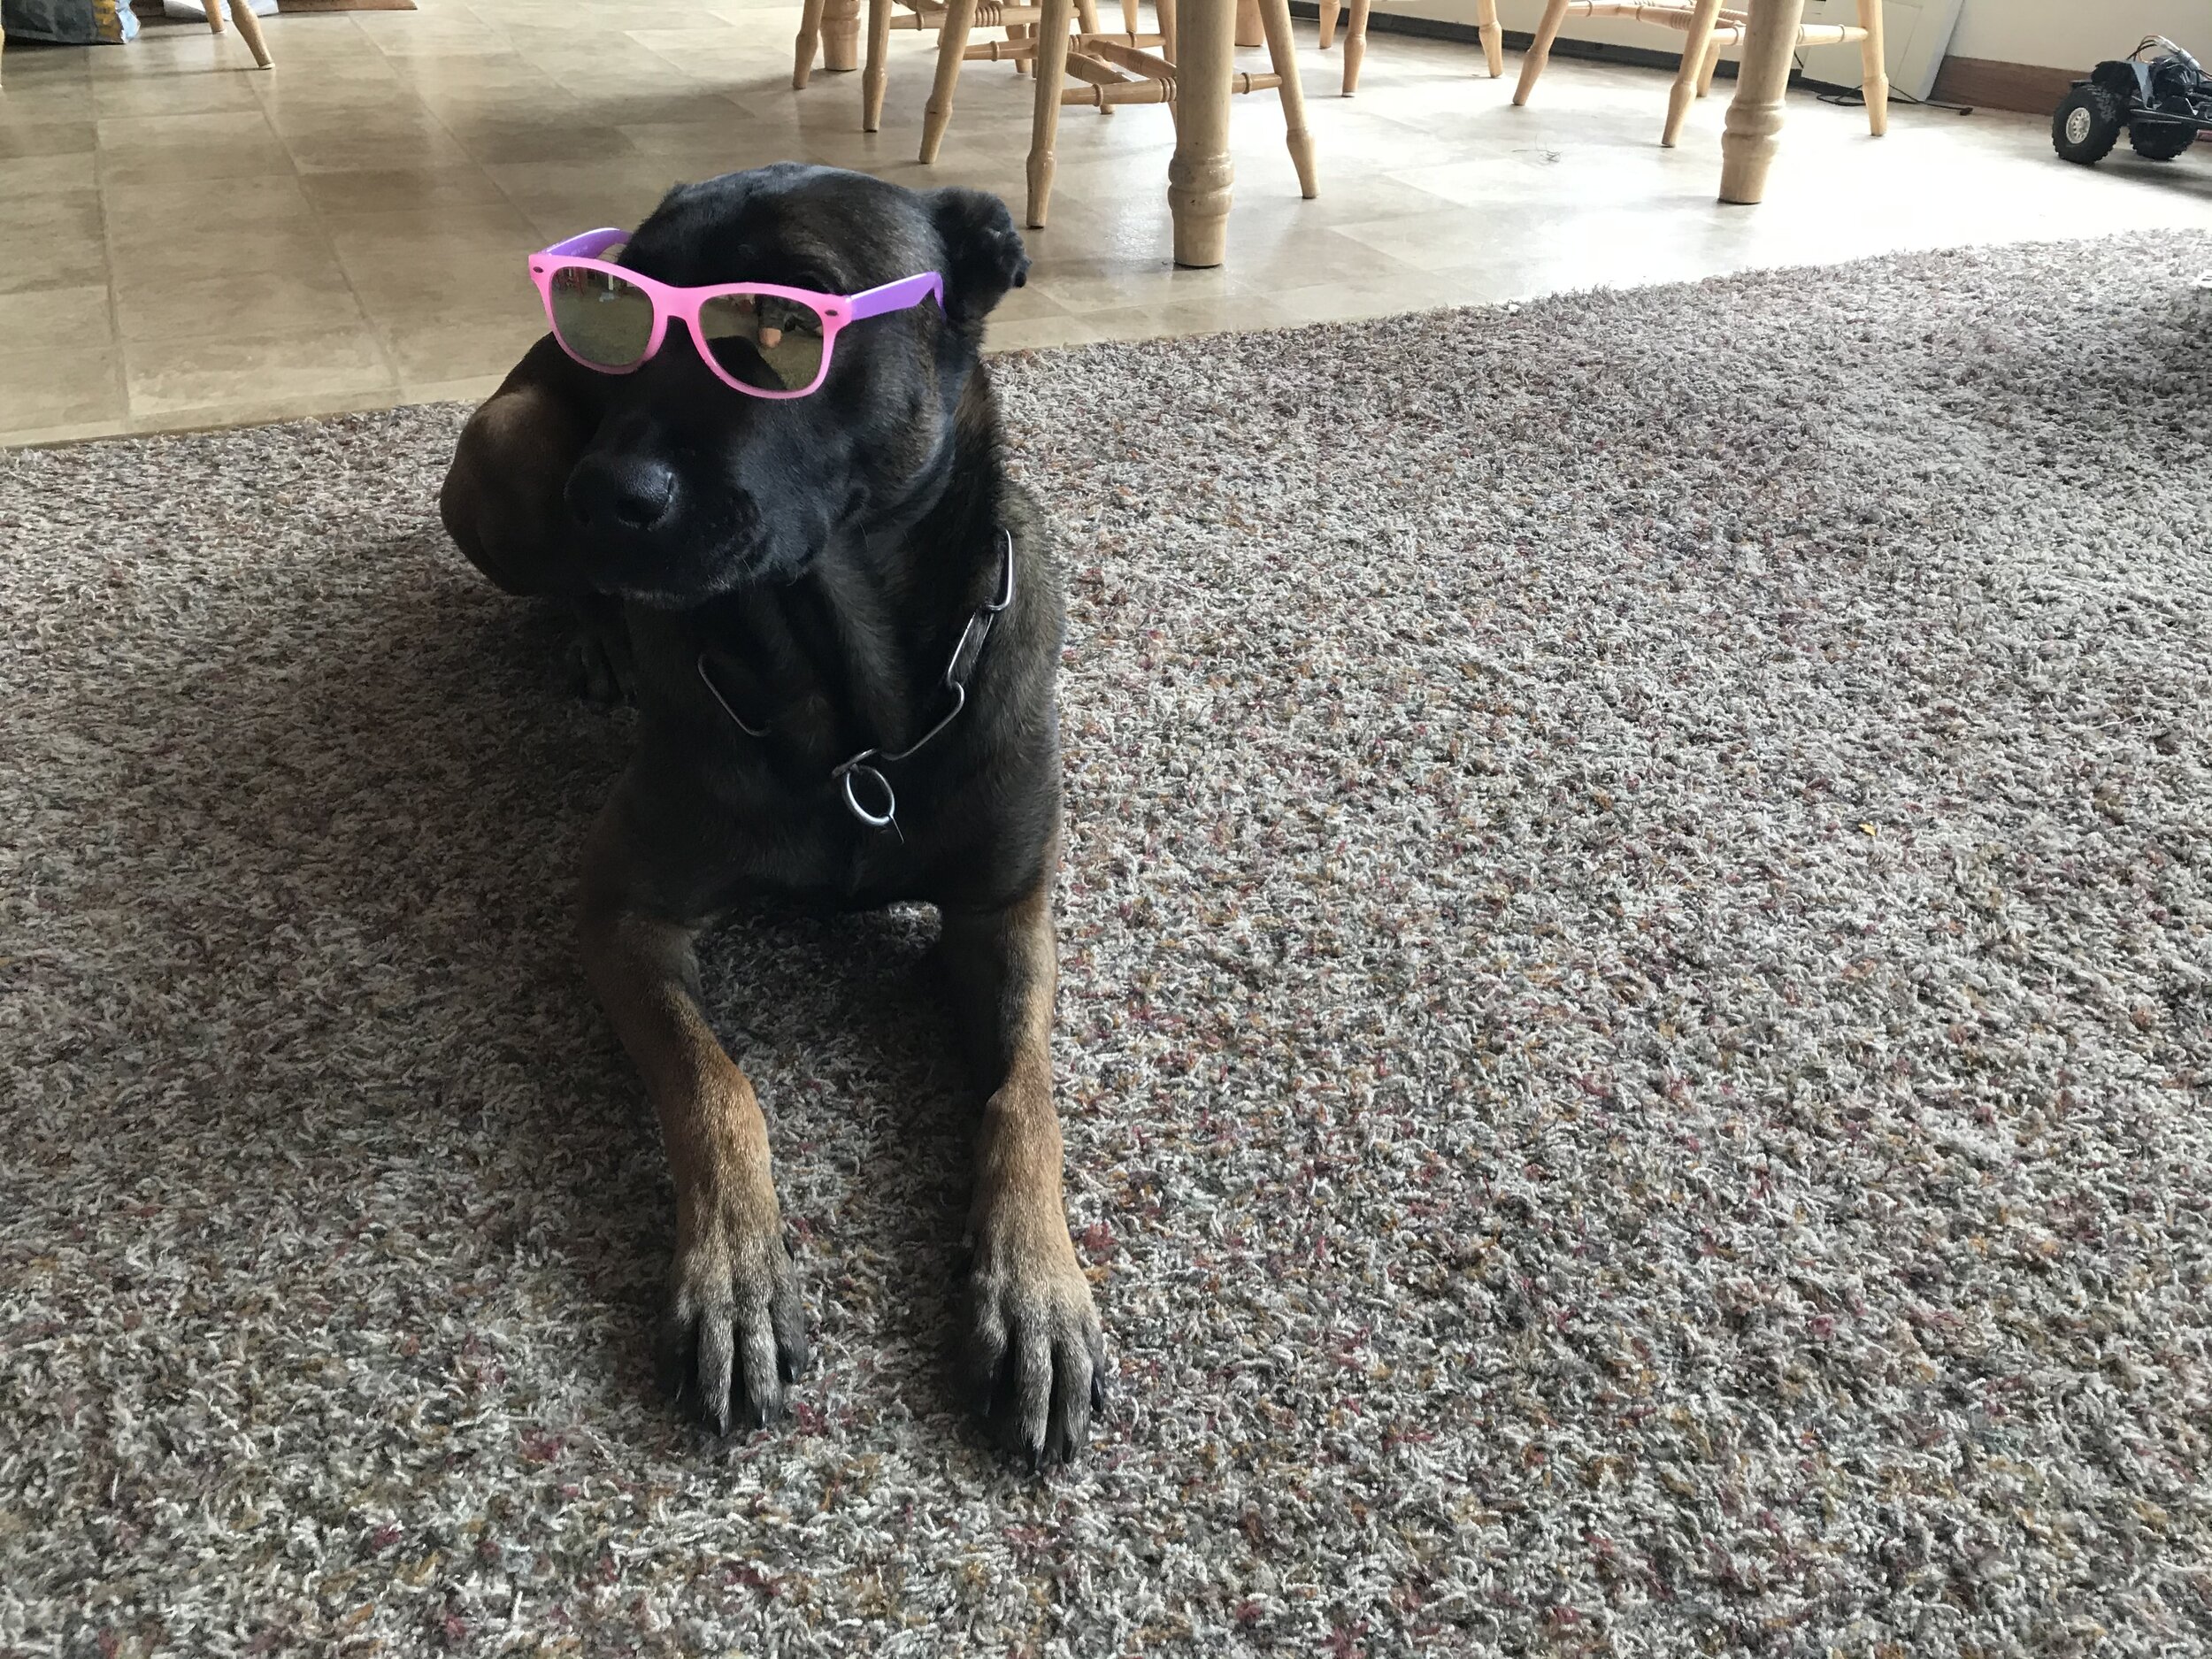 K9 Rylin - Knows how to play it cool